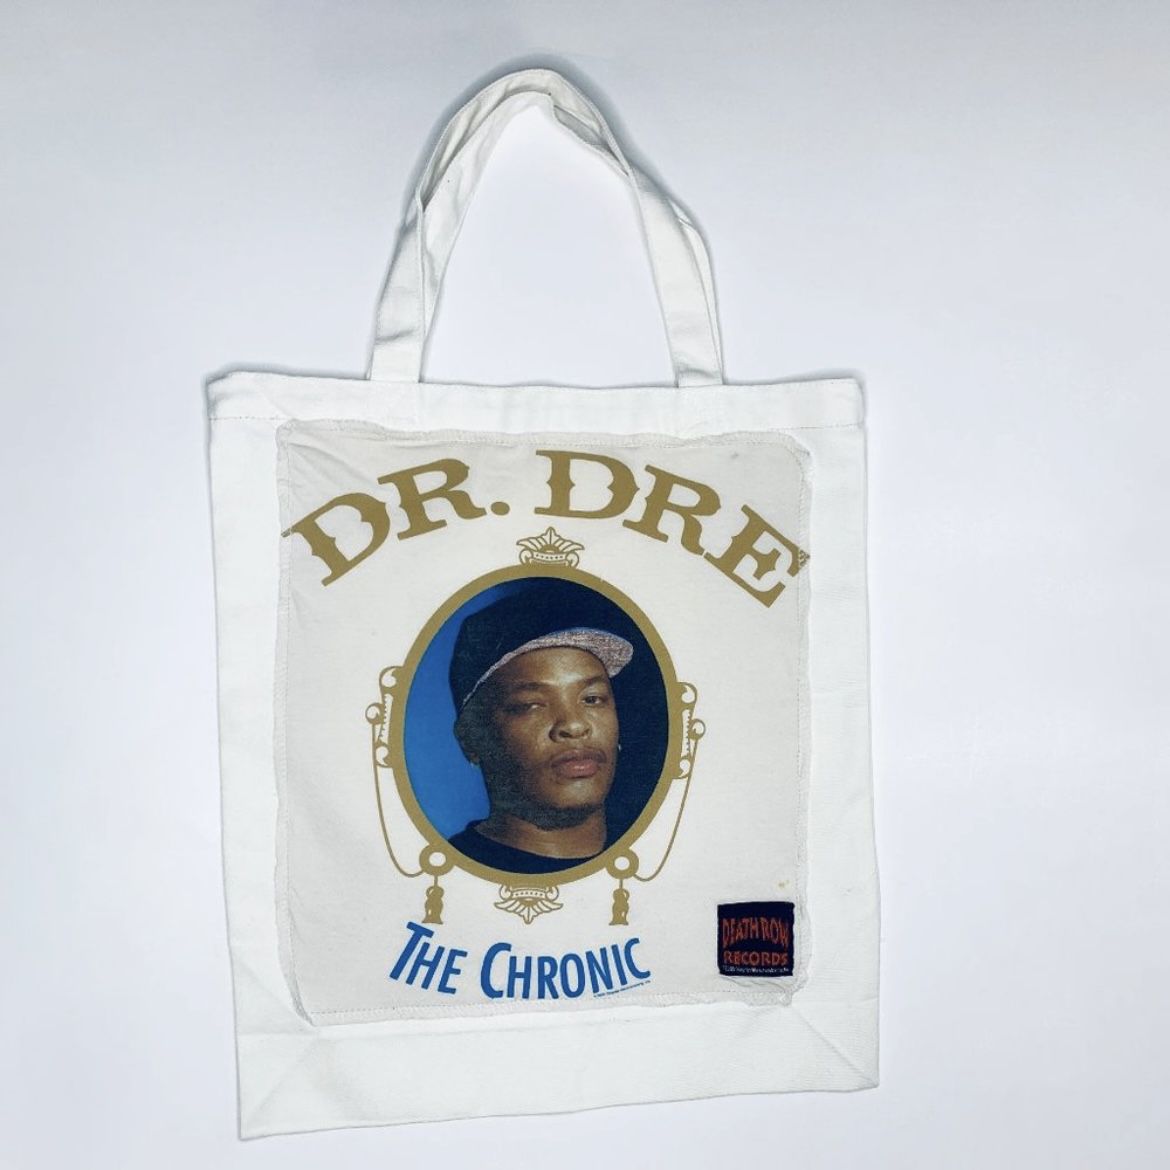 Tote Bag Made From vintage 90s Dr. Dre Tshirt